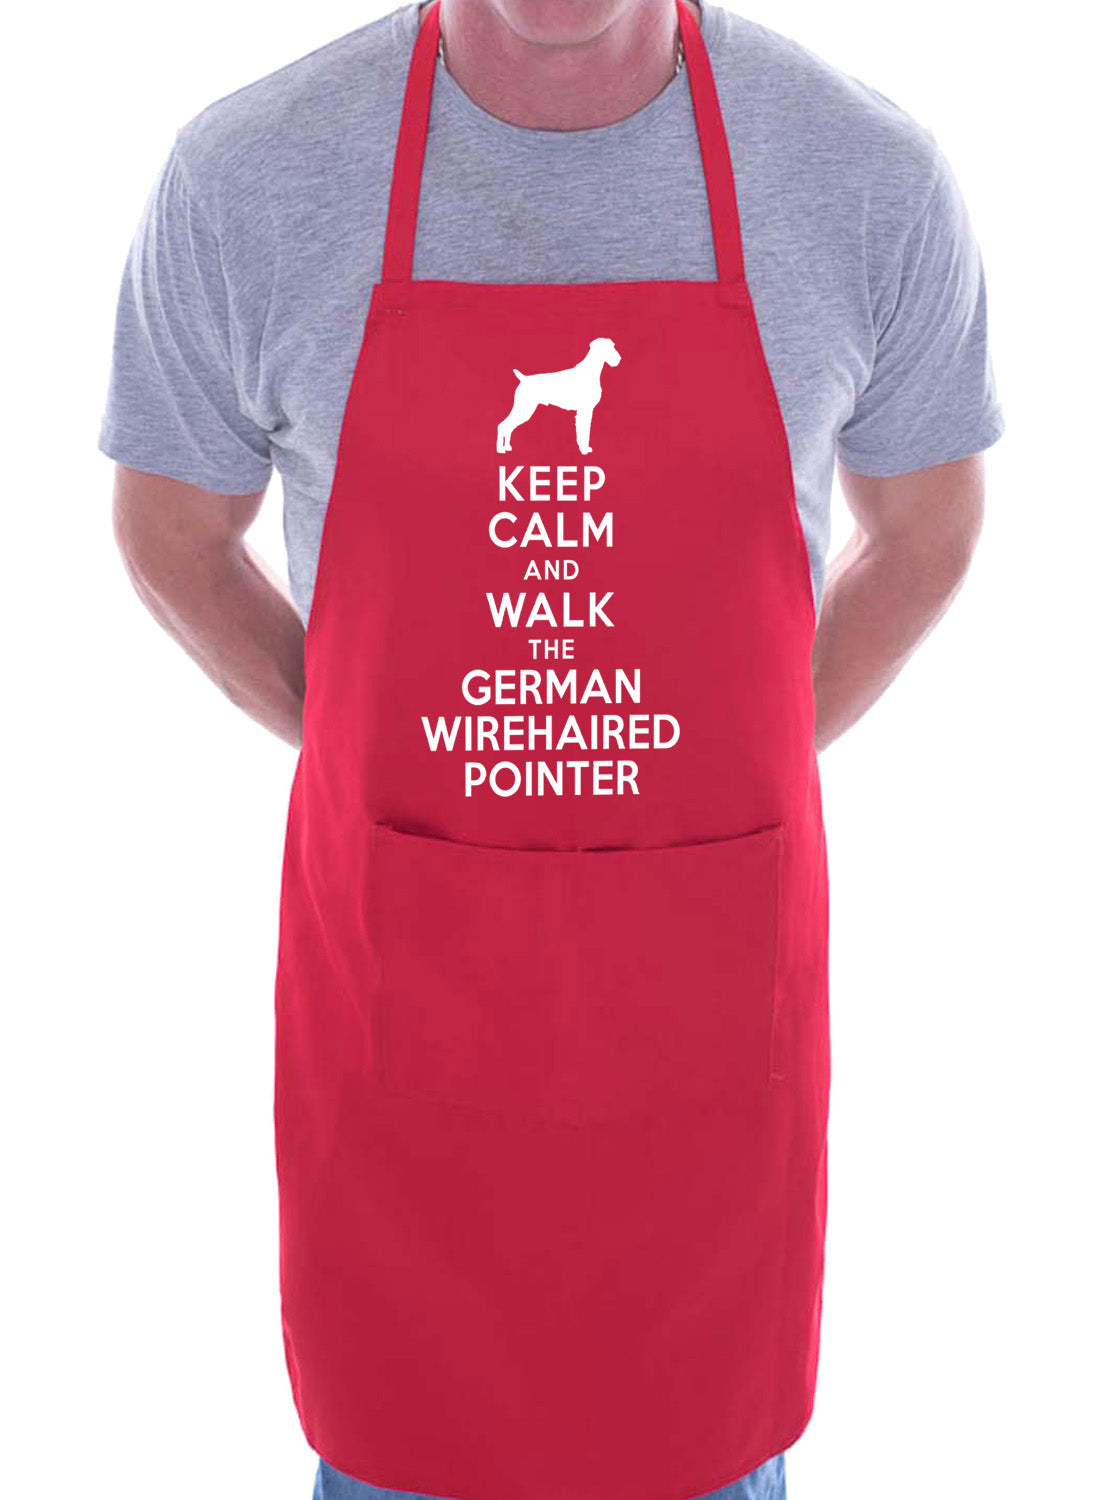 Keep Calm and Walk German Wirehaired Pointer Funny BBQ Novelty Cooking Apron